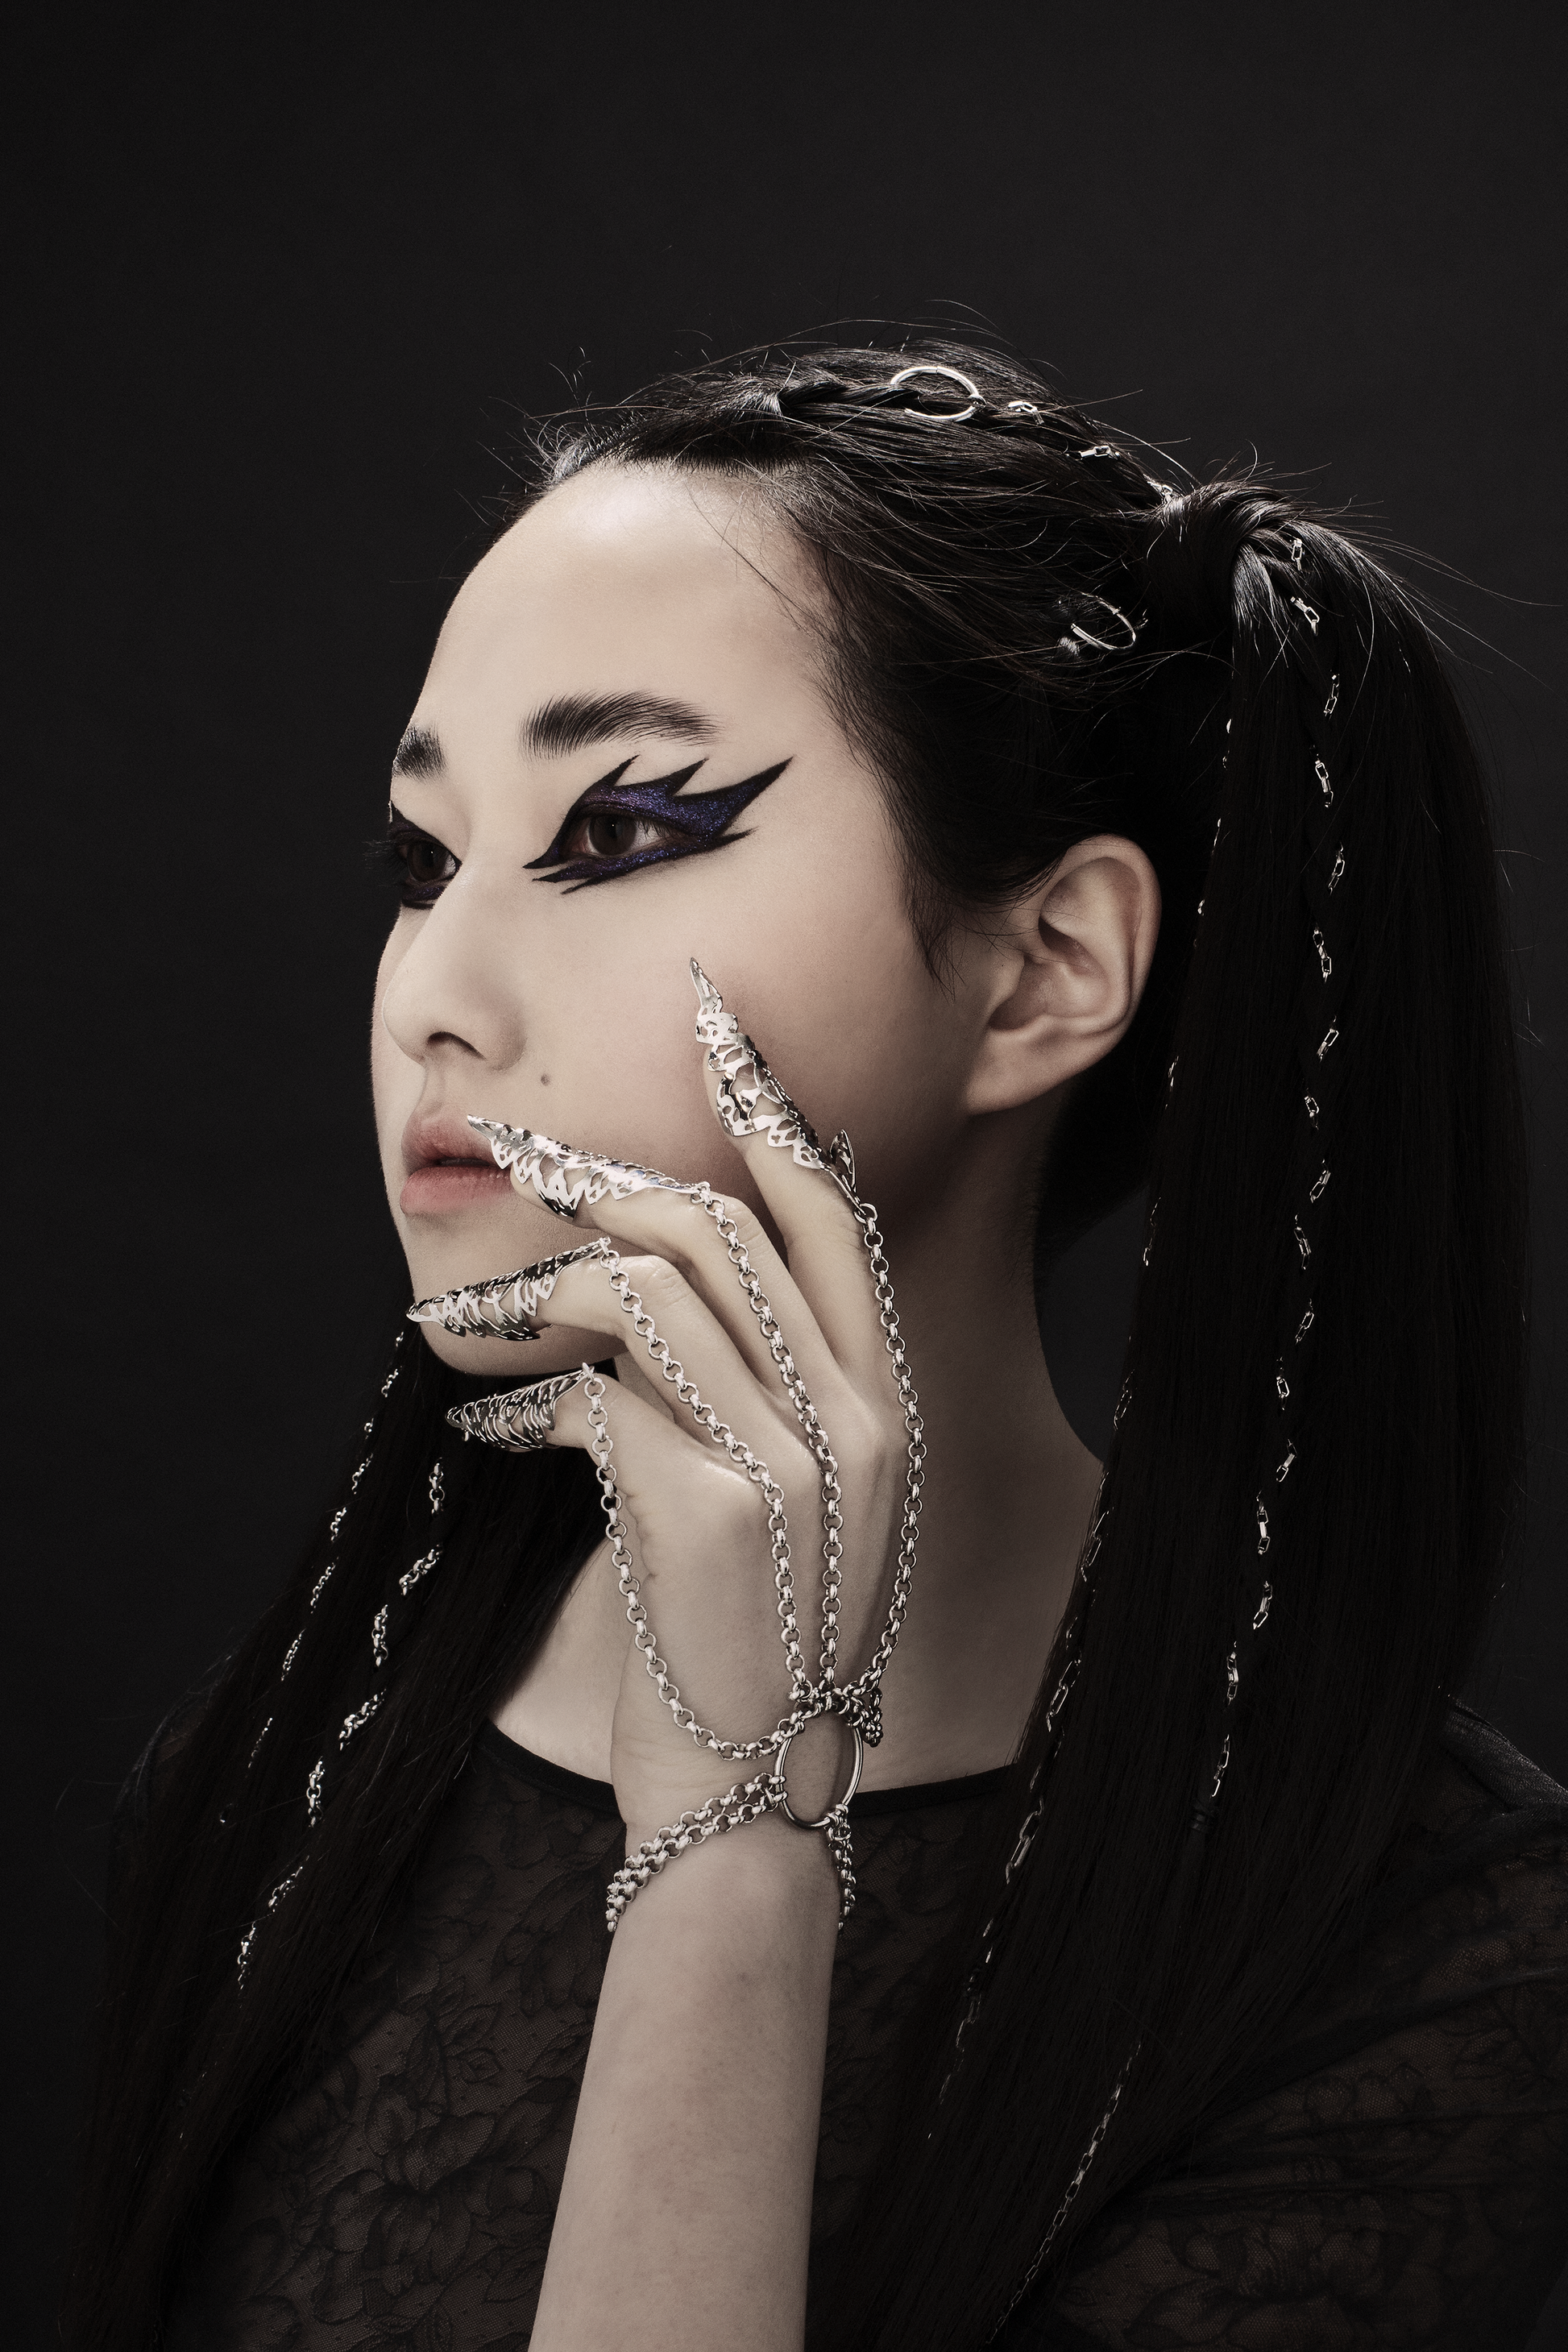 Striking hand chain bracelet with nail claws by Myril Jewels, embodying a dark avant-garde aesthetic. This neo-goth piece is ideal for Halloween and punk looks, infusing whimsigoth elegance into everyday wear, festival outfits, or as a unique goth girlfriend gift